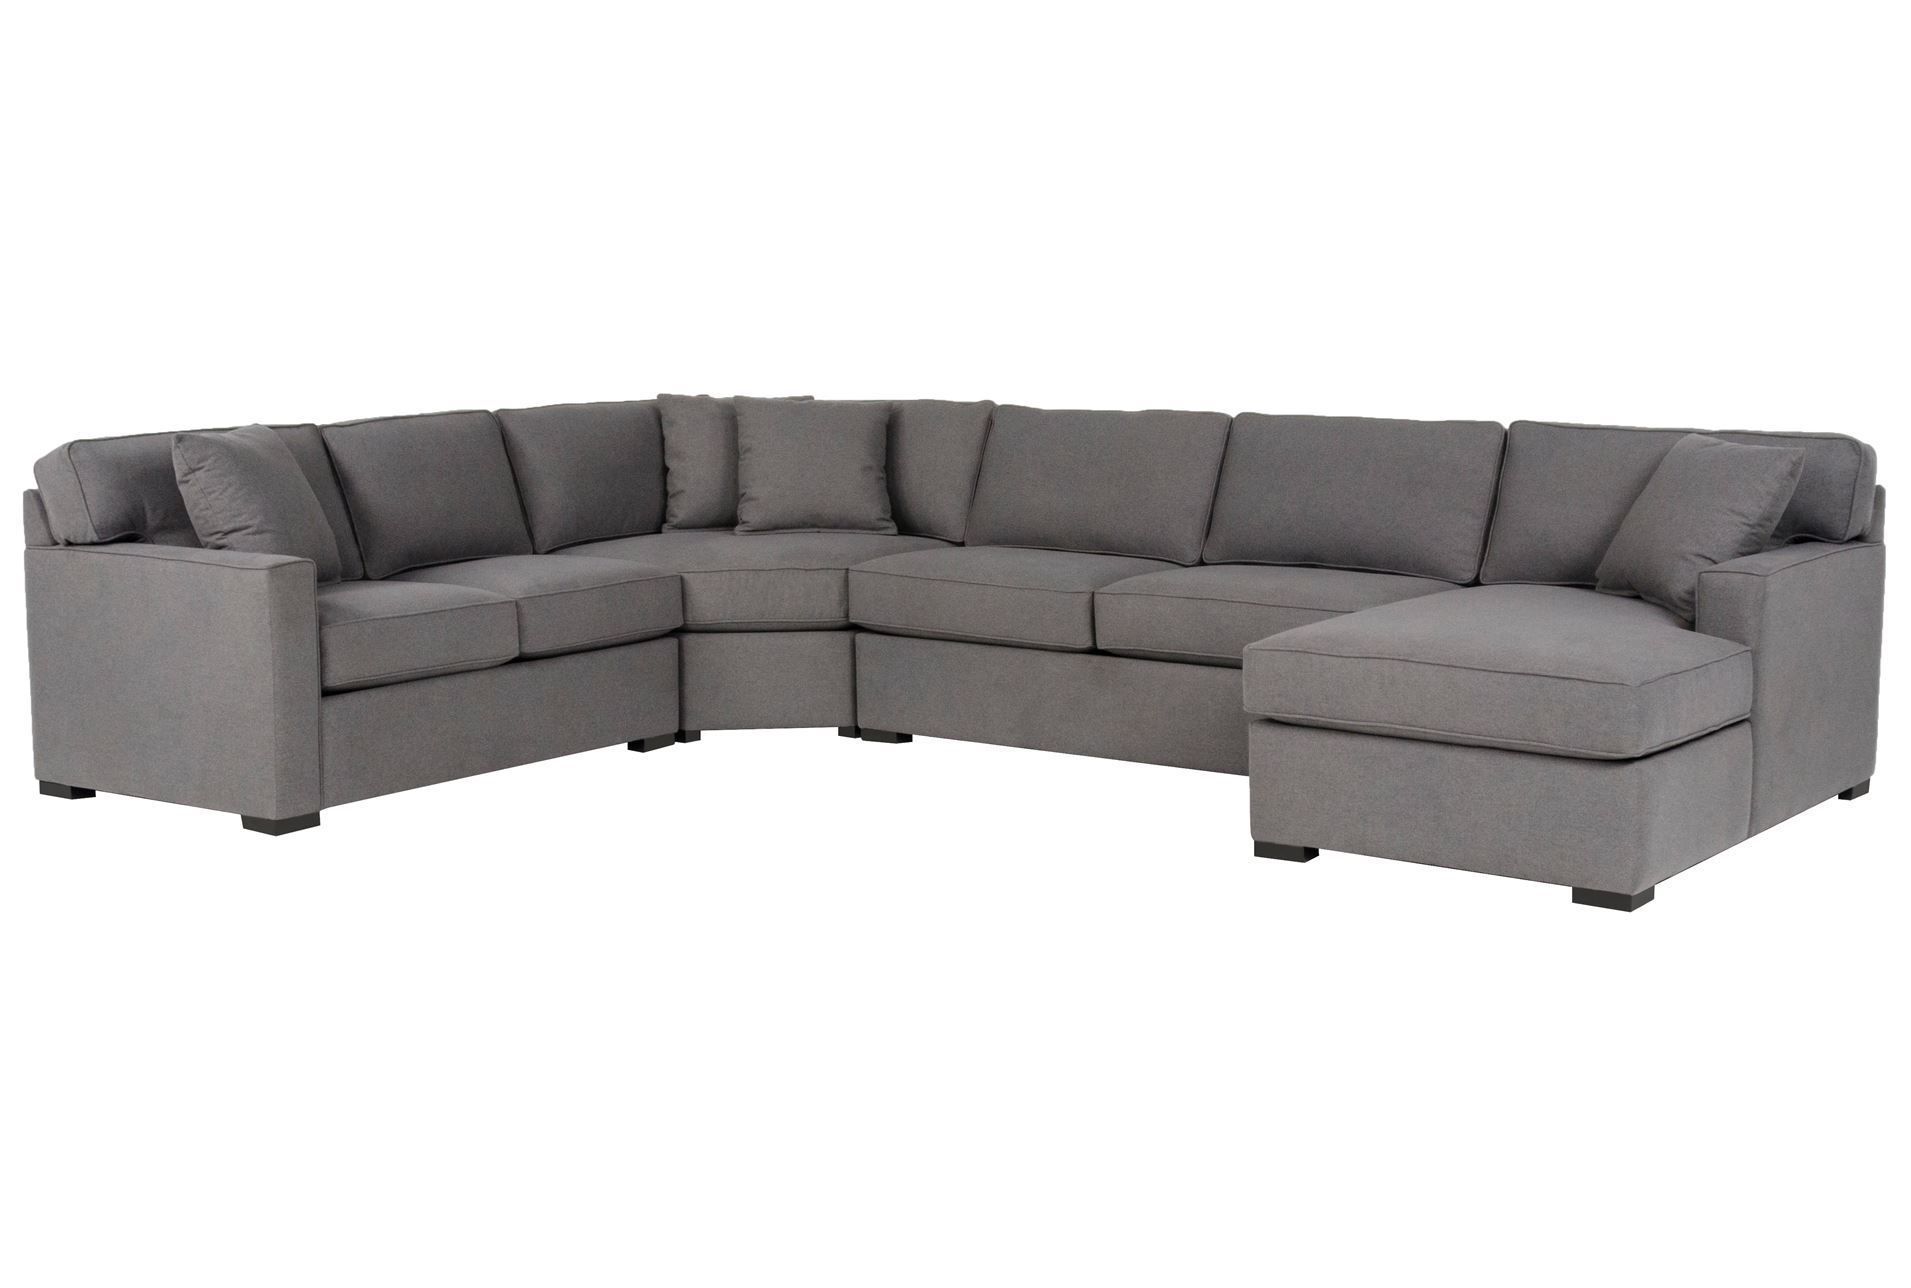 Alder 4 Piece Sectional | Dream Home – Sit Down | Pinterest | Living In Alder 4 Piece Sectionals (View 4 of 30)